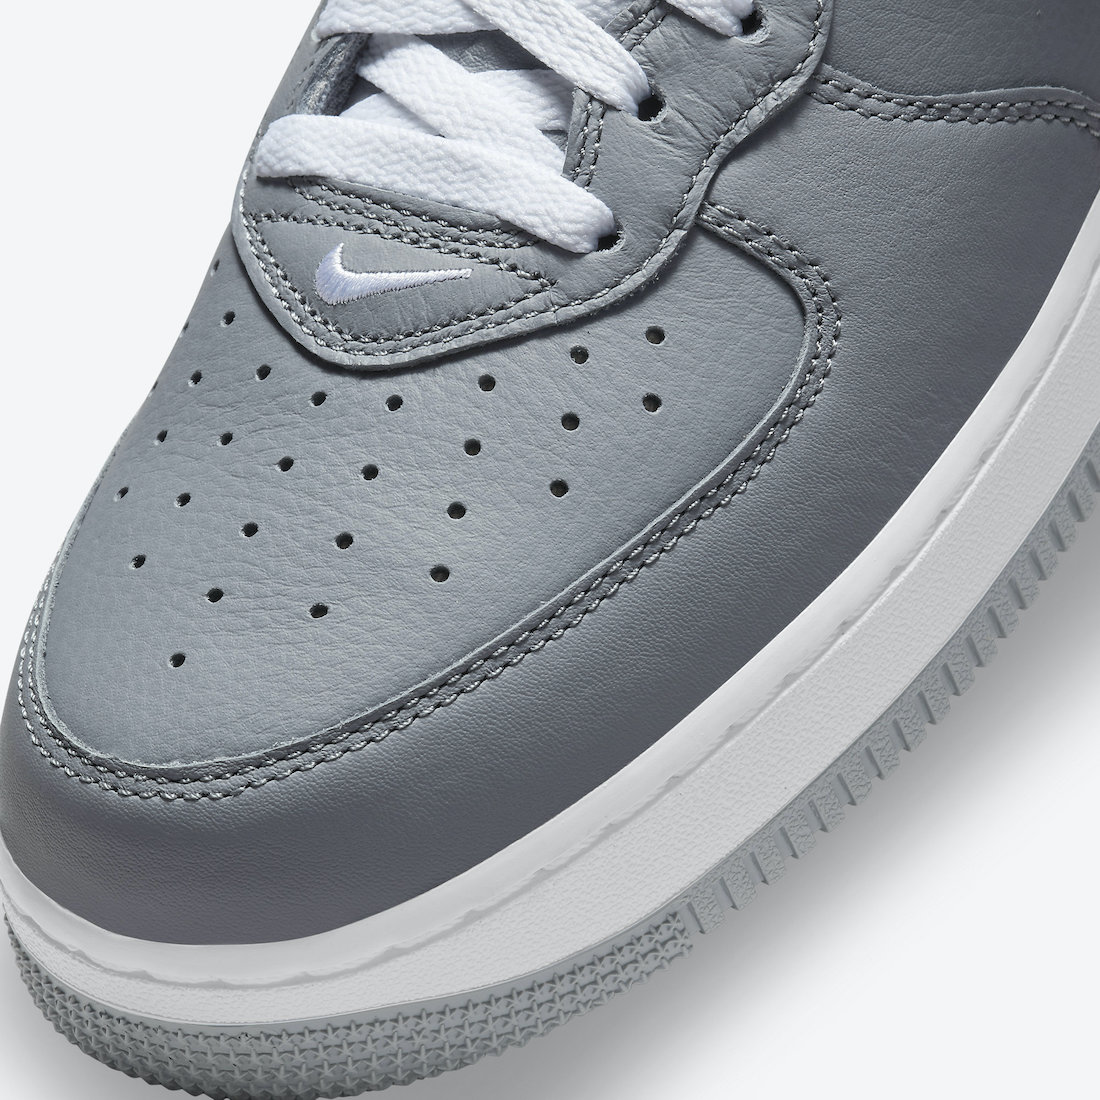 Nike Air Force 1 Mid Jewel NYC Cool Grey DH5622-001 Release Date - SBD